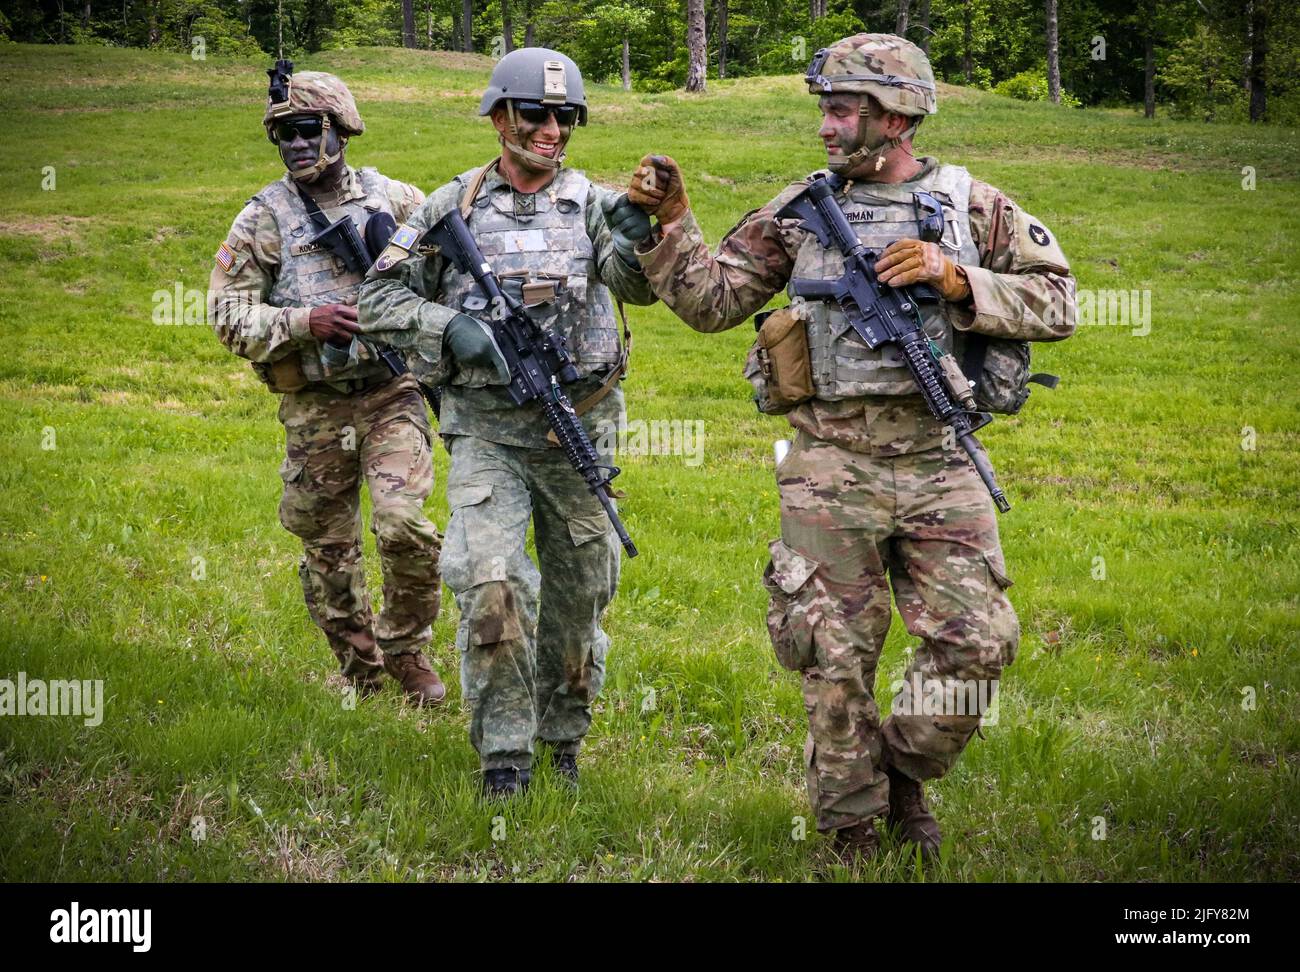 May 19, 2022 - Camp Atterbury, Indiana, USA - Spc. Noah Bierman, a West Liberty, Iowa, native and infantryman assigned to Company B, 1st Battalion, 133rd Infantry Regiment, fist bumps a member of the Kosovo Security Force after completing a wedge formation live-fire exercise at Camp Atterbury, Indiana, on May 19, 2022. Approximately 15 KSF troops embedded with companies in the 1-133rd Infantry during a two-week annual training exercise. Two KSF troops conducted the live-fire exercise with the U.S. infantrymen. Senior leaders in the IANG and KSF visited each company near the end of the exercise Stock Photo